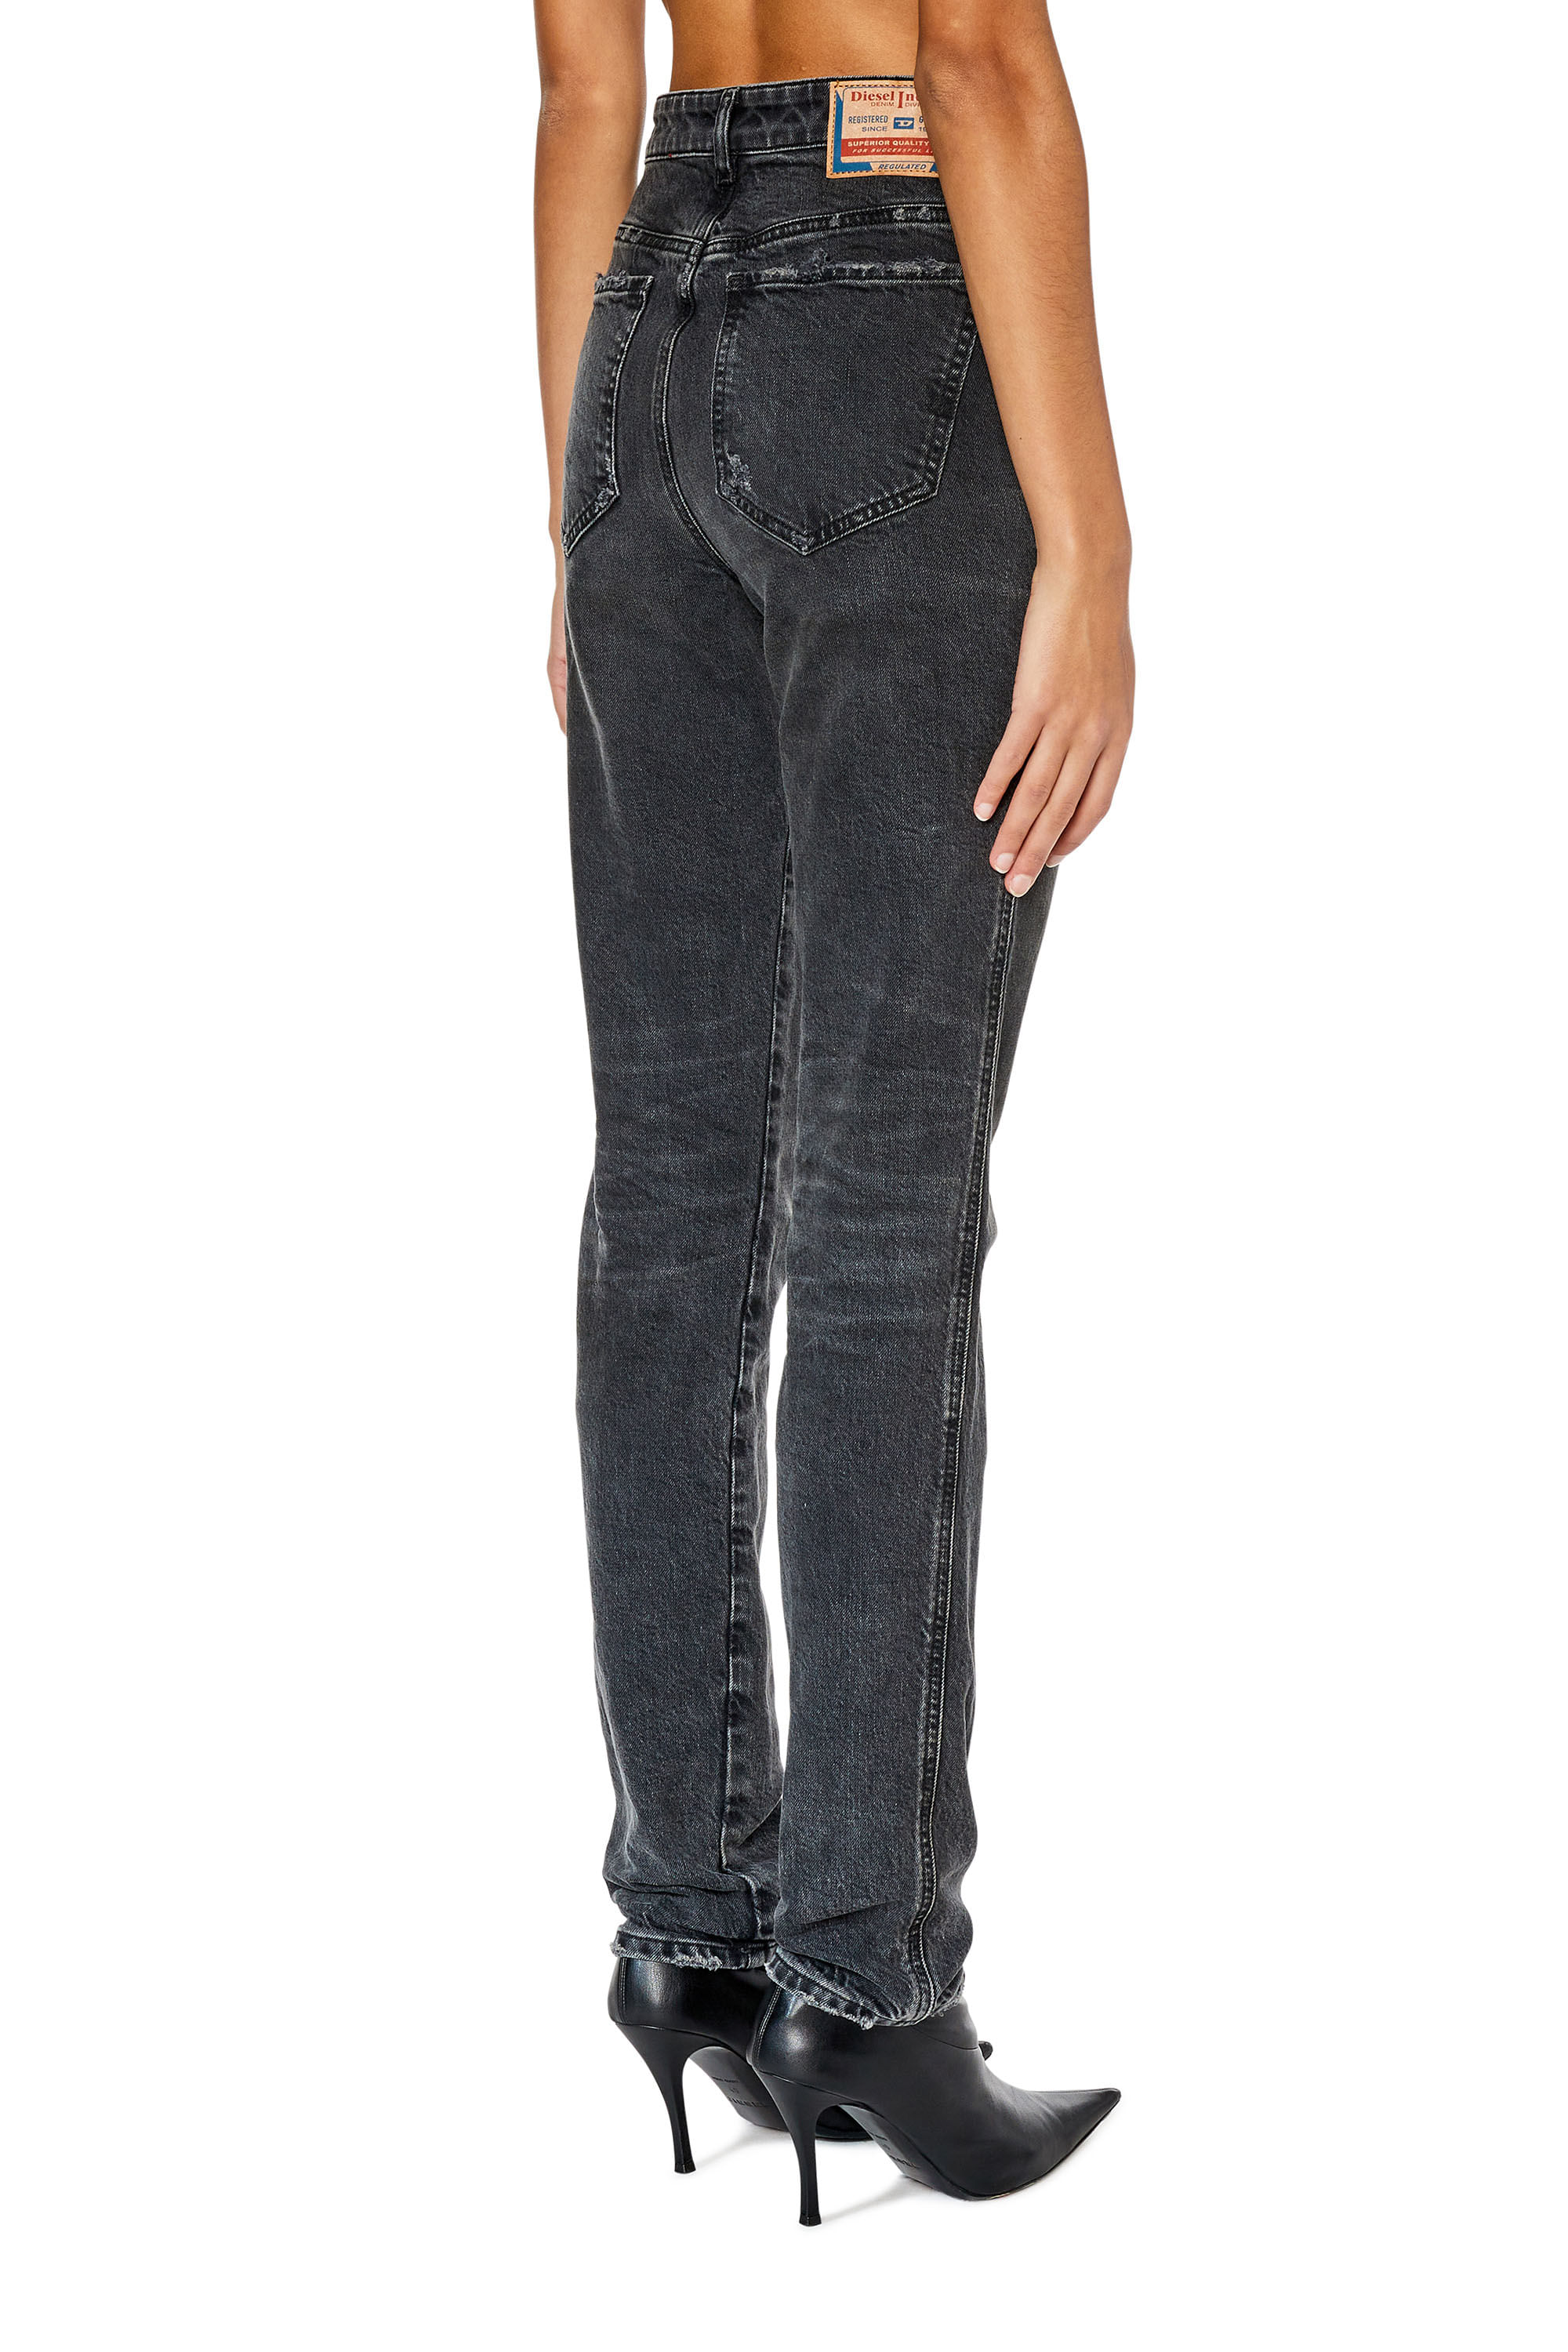 Jean Stretch Para Mujer Jean Pedal 3045, JEANS